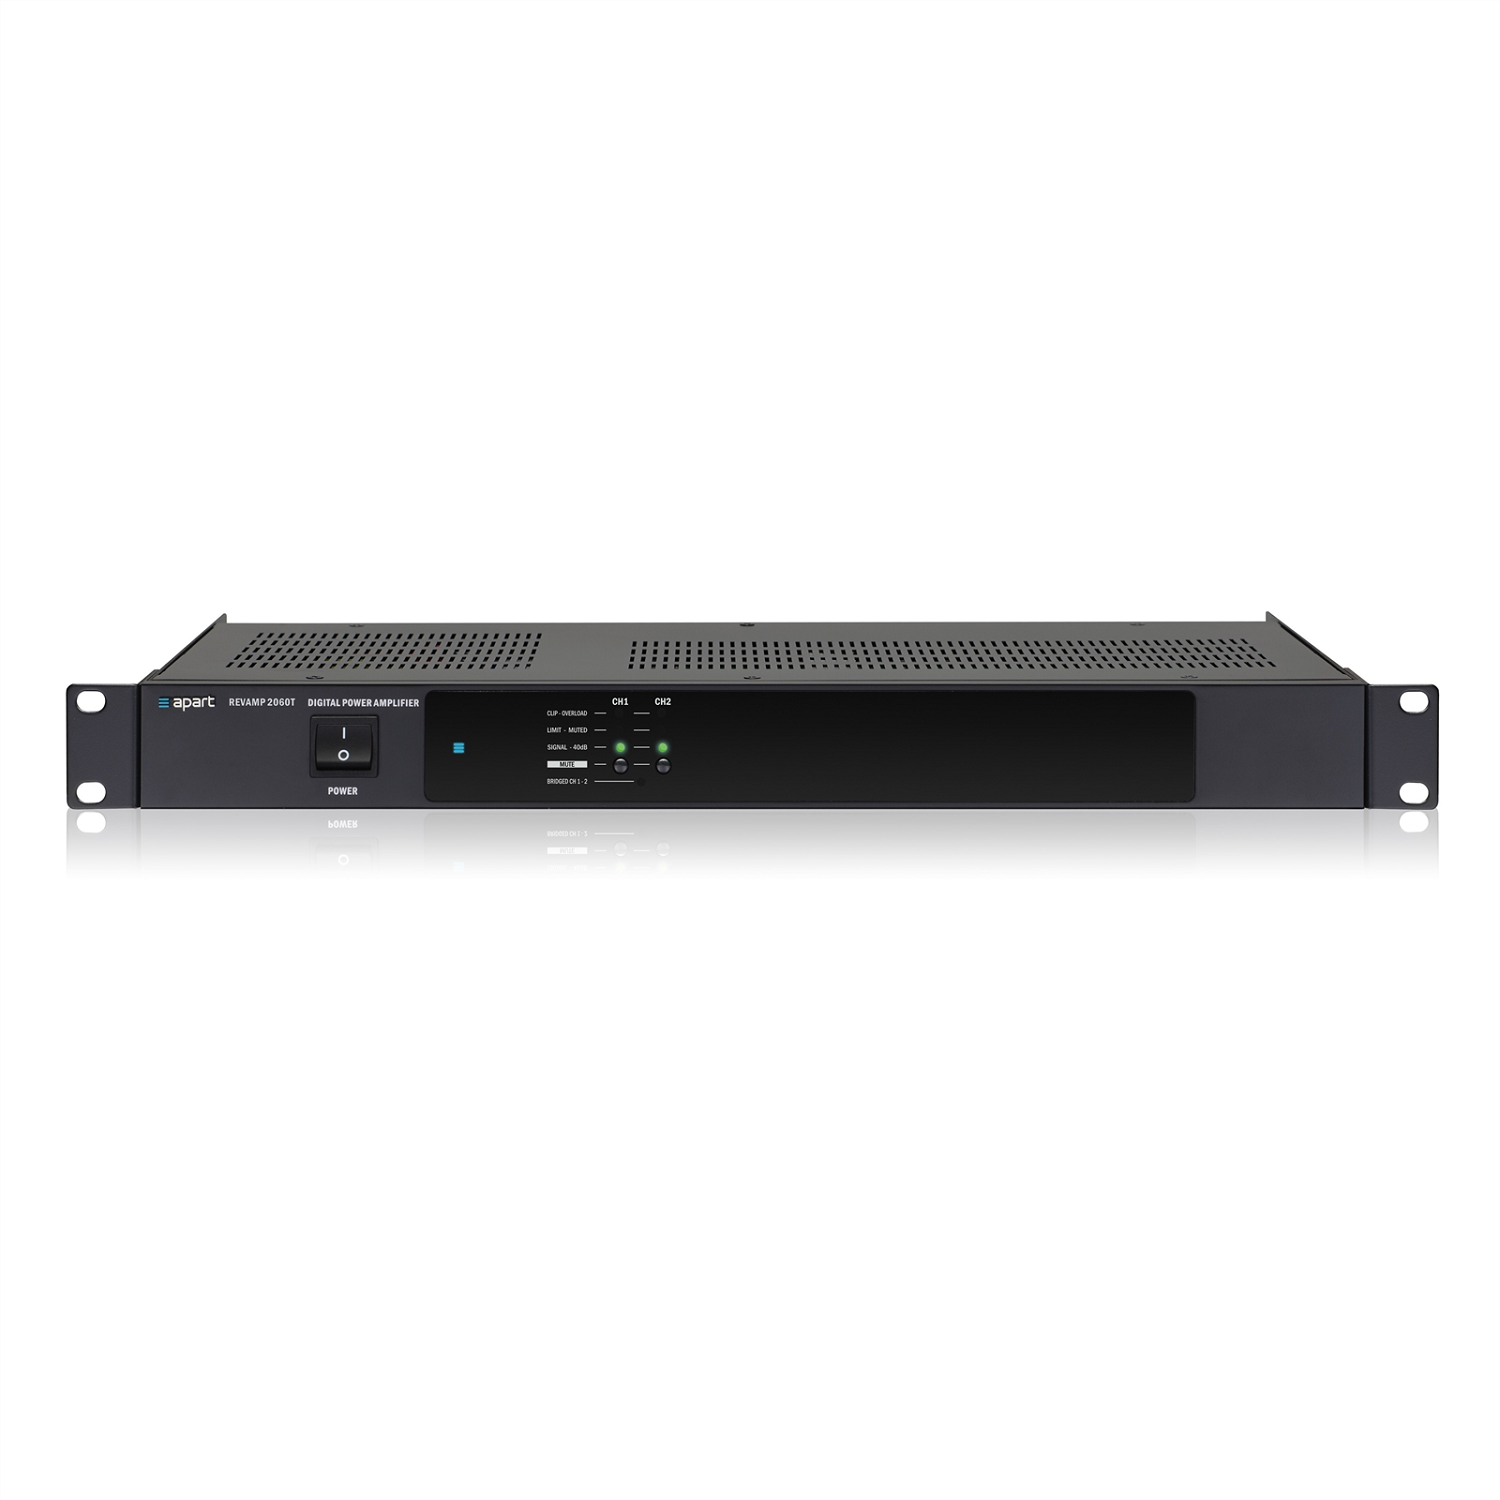 2 Channel class D amplifier 2 x 60 Watts (70/100 Volts or RMS @ 4 Ohms) or in bridge mode 1 x 120 Watts (70/100 Volts or RMS @ 8 Ohms), Convection Cooled, 1 U, 19&quot; Rackmount , REVAMP2060T , APART